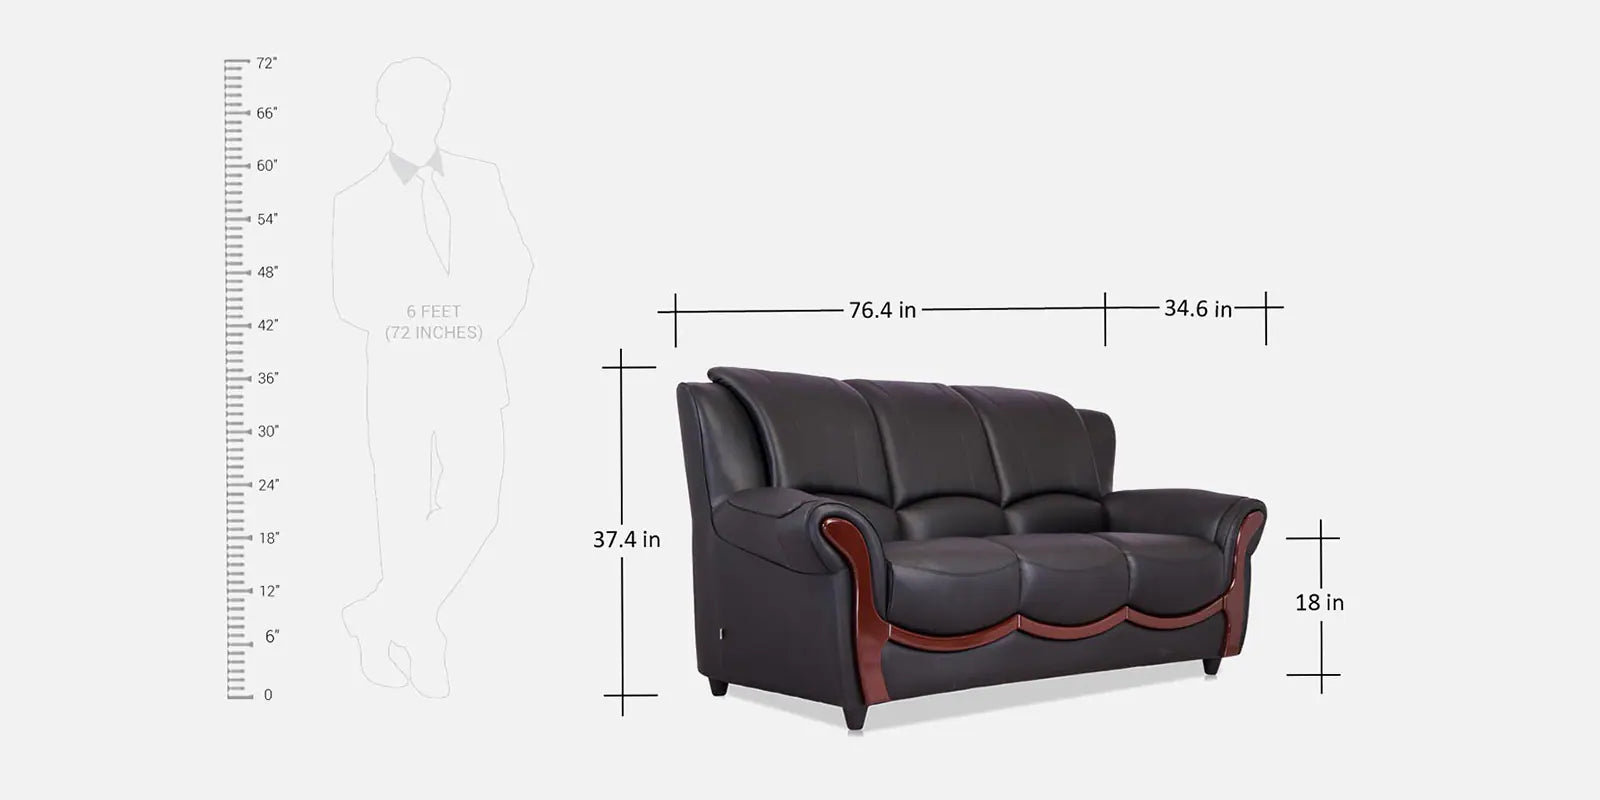 Leatherette 3 Seater Sofa in Eerie Black Colour